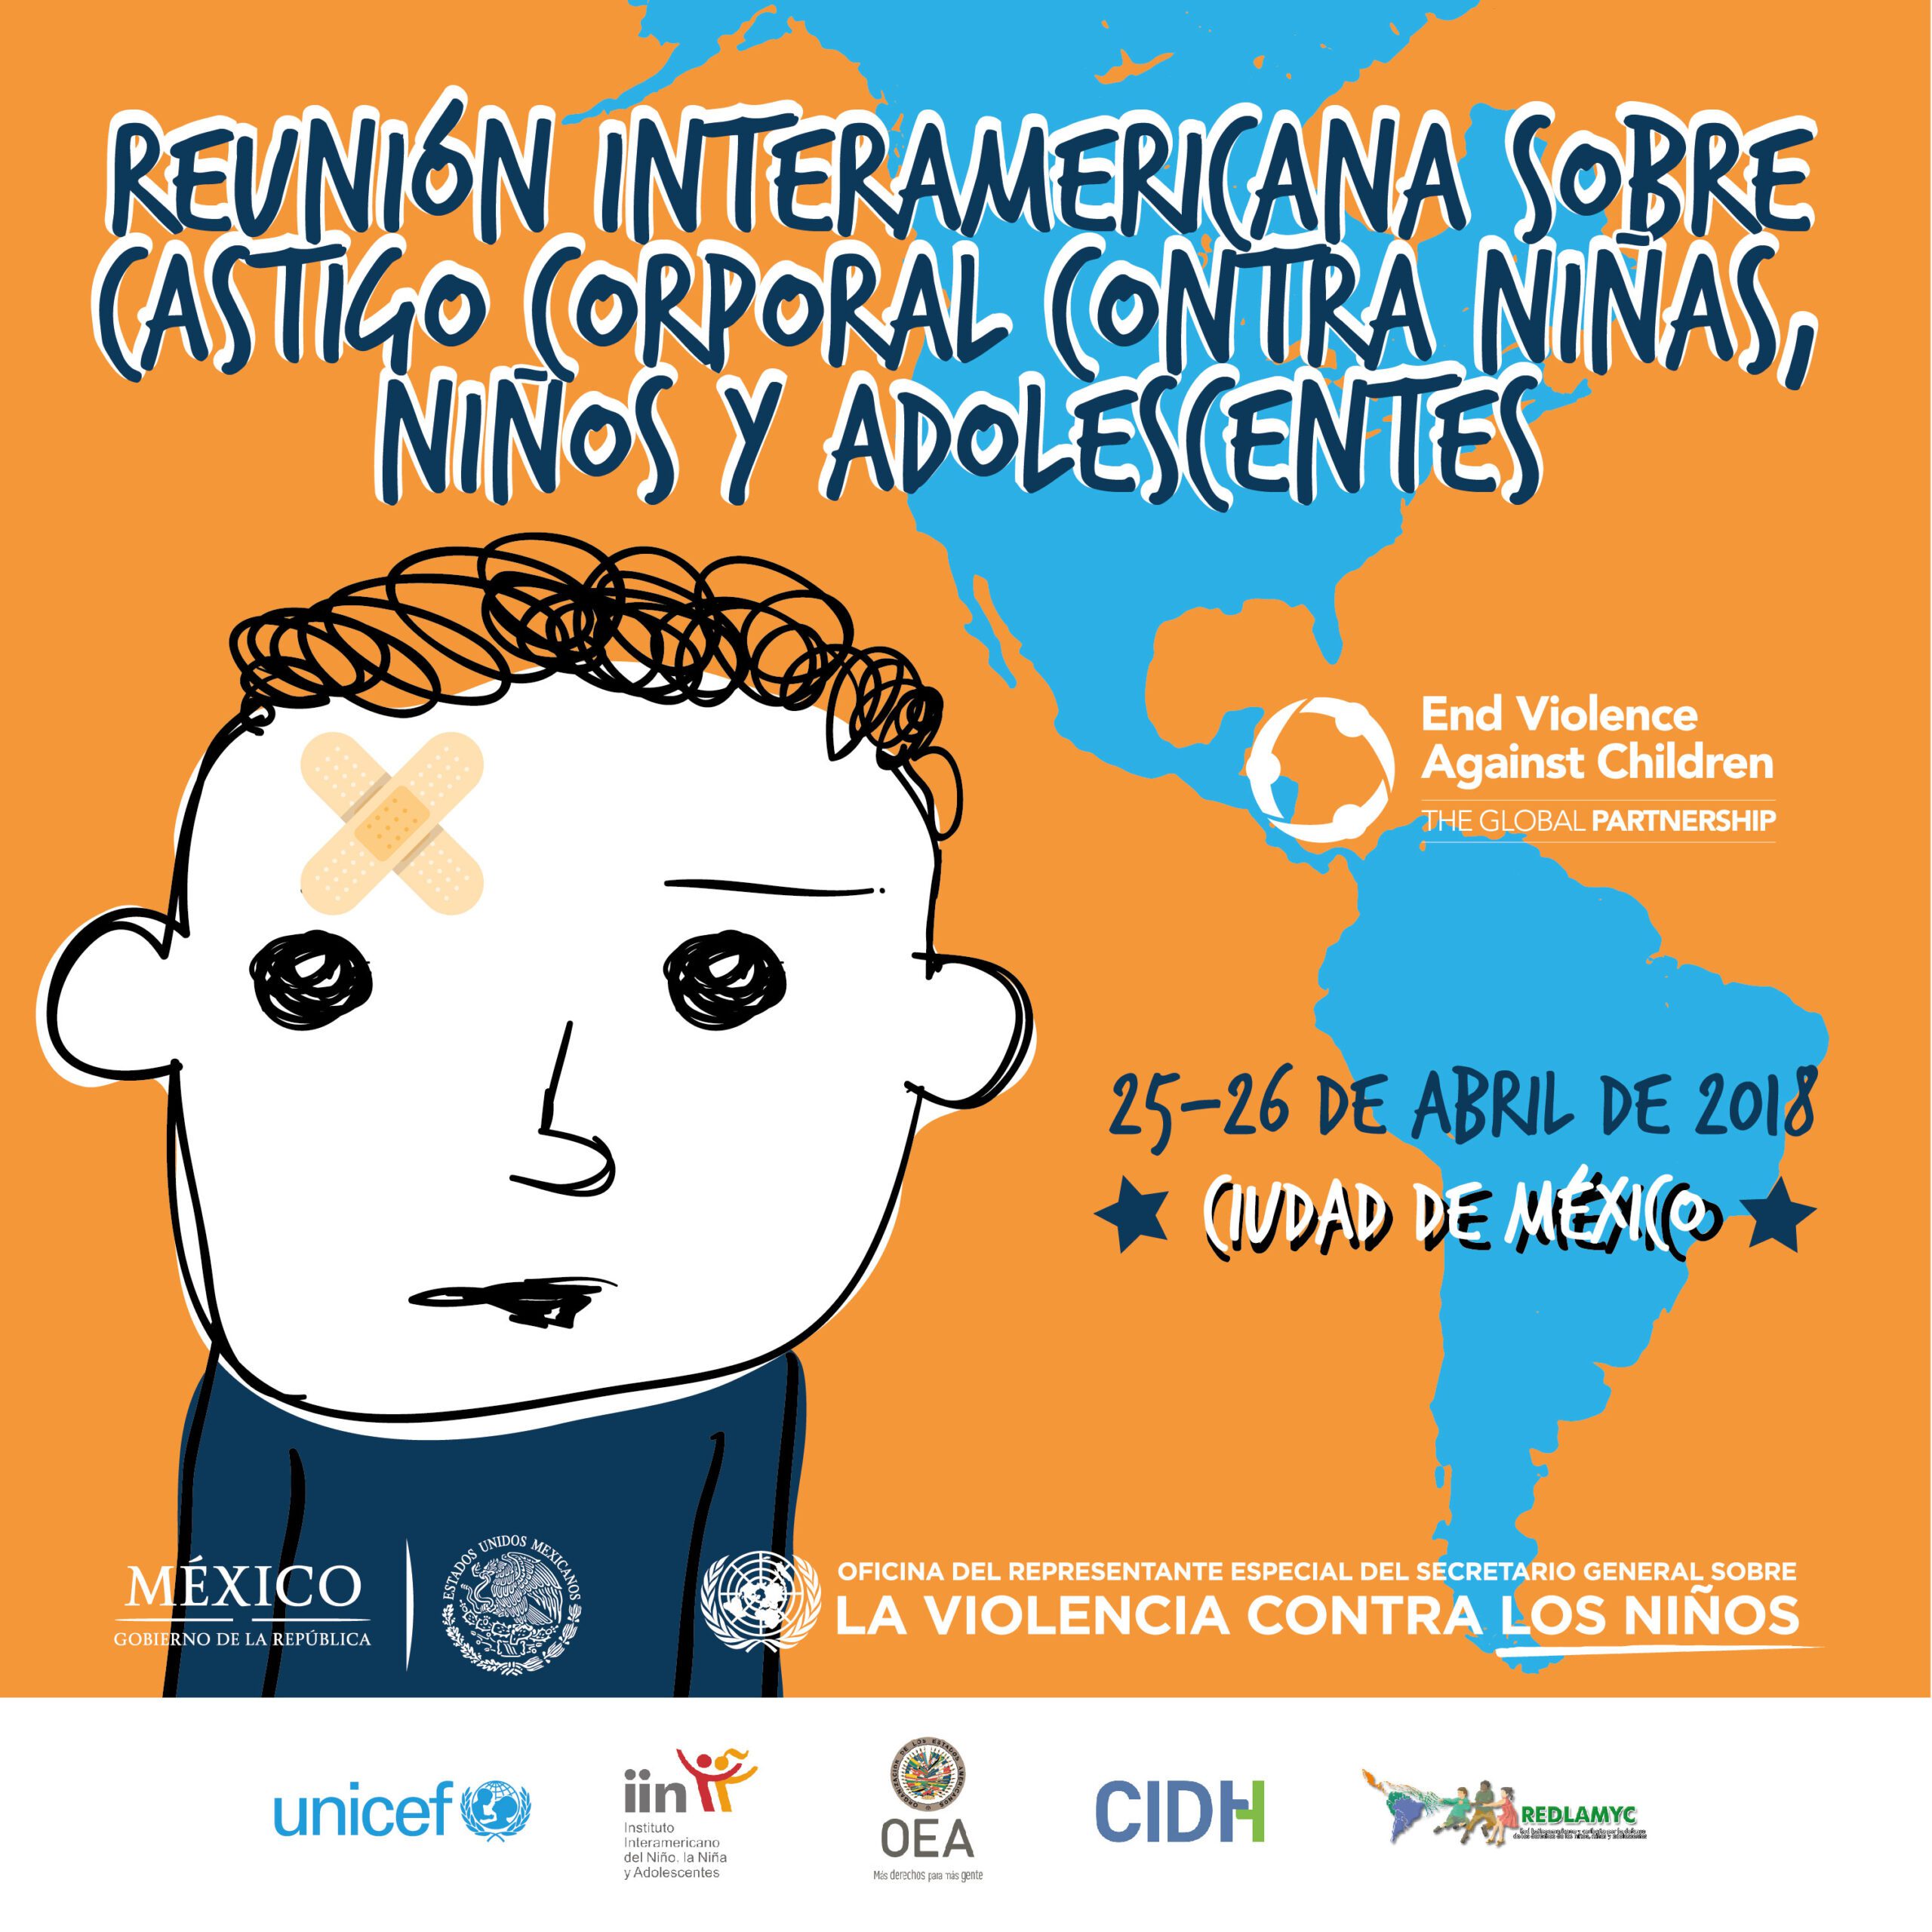 GNRC Participates in the Inter-American Meeting on Corporal Punishment of Children